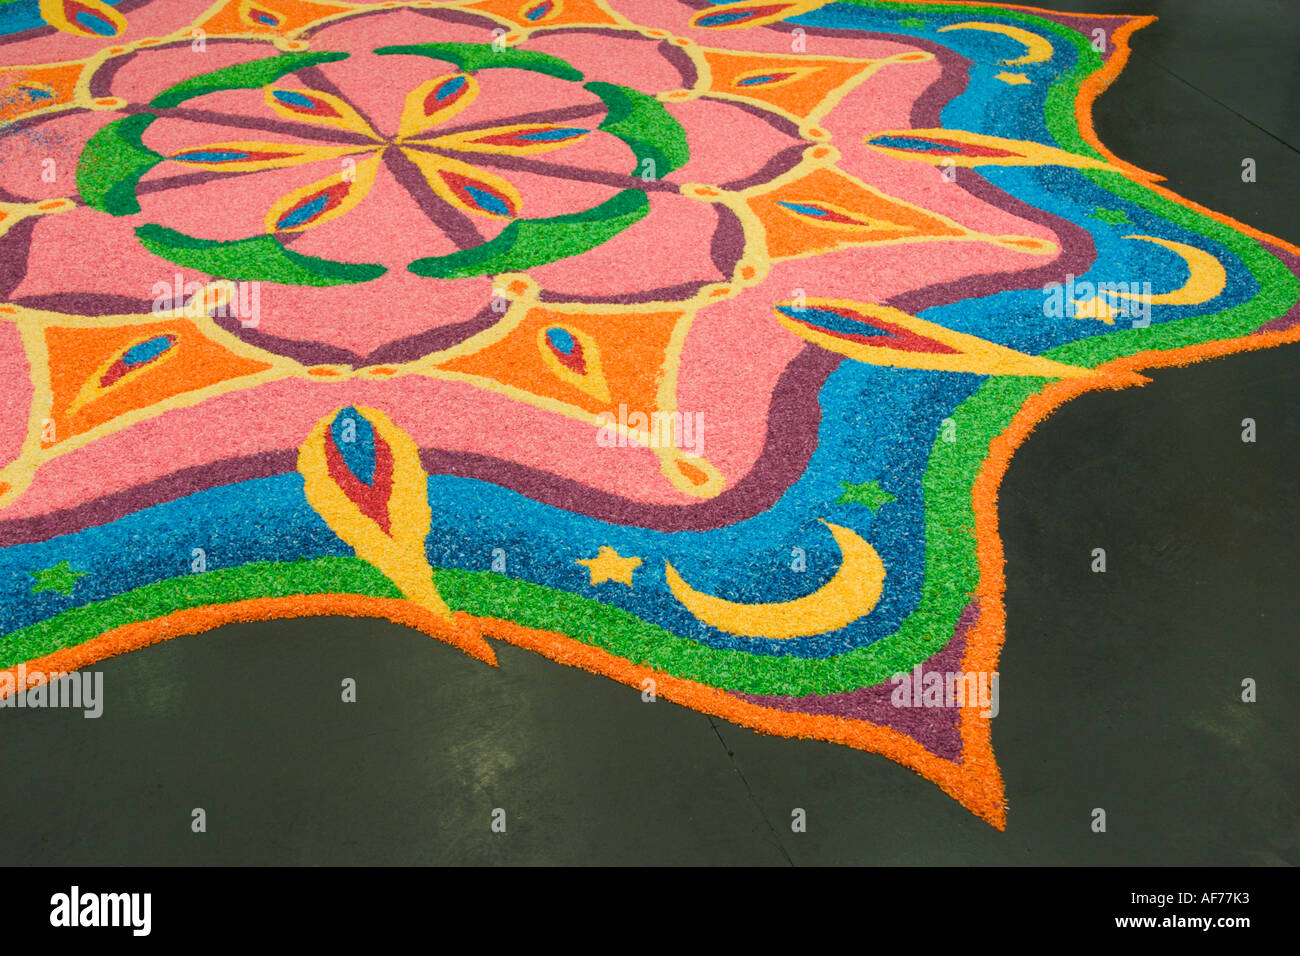 kolam - decorative artwork drawn on floor by south indians using rice